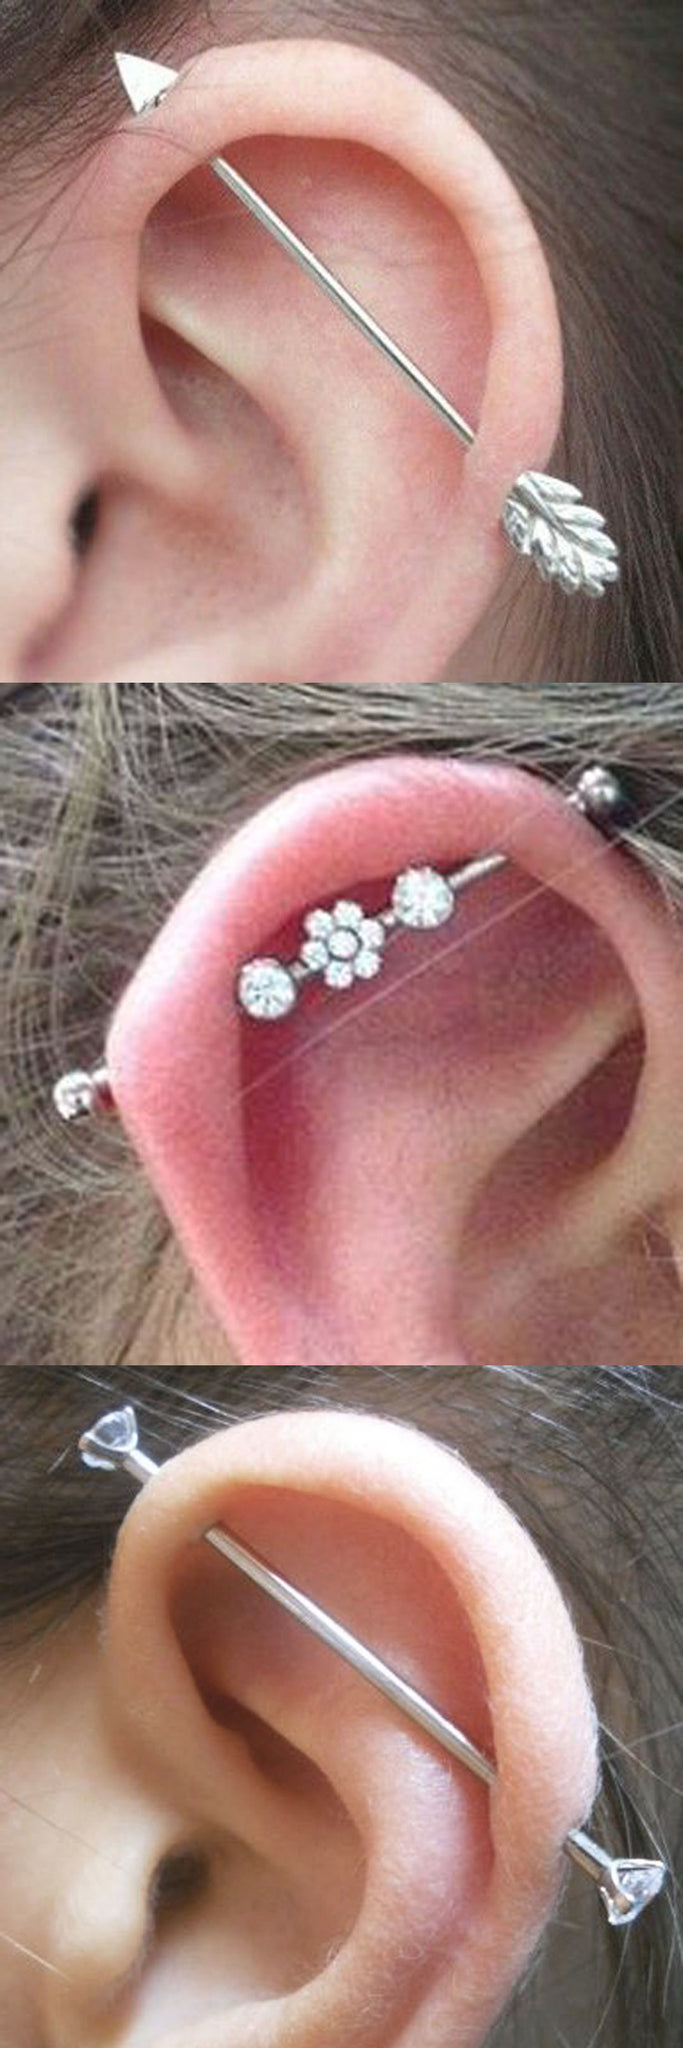 Upper Ear Piercing Ideas for Girls - Second Hole All the Way Up - Industrial Piercing Jewelry 14G at MyBodiArt.com